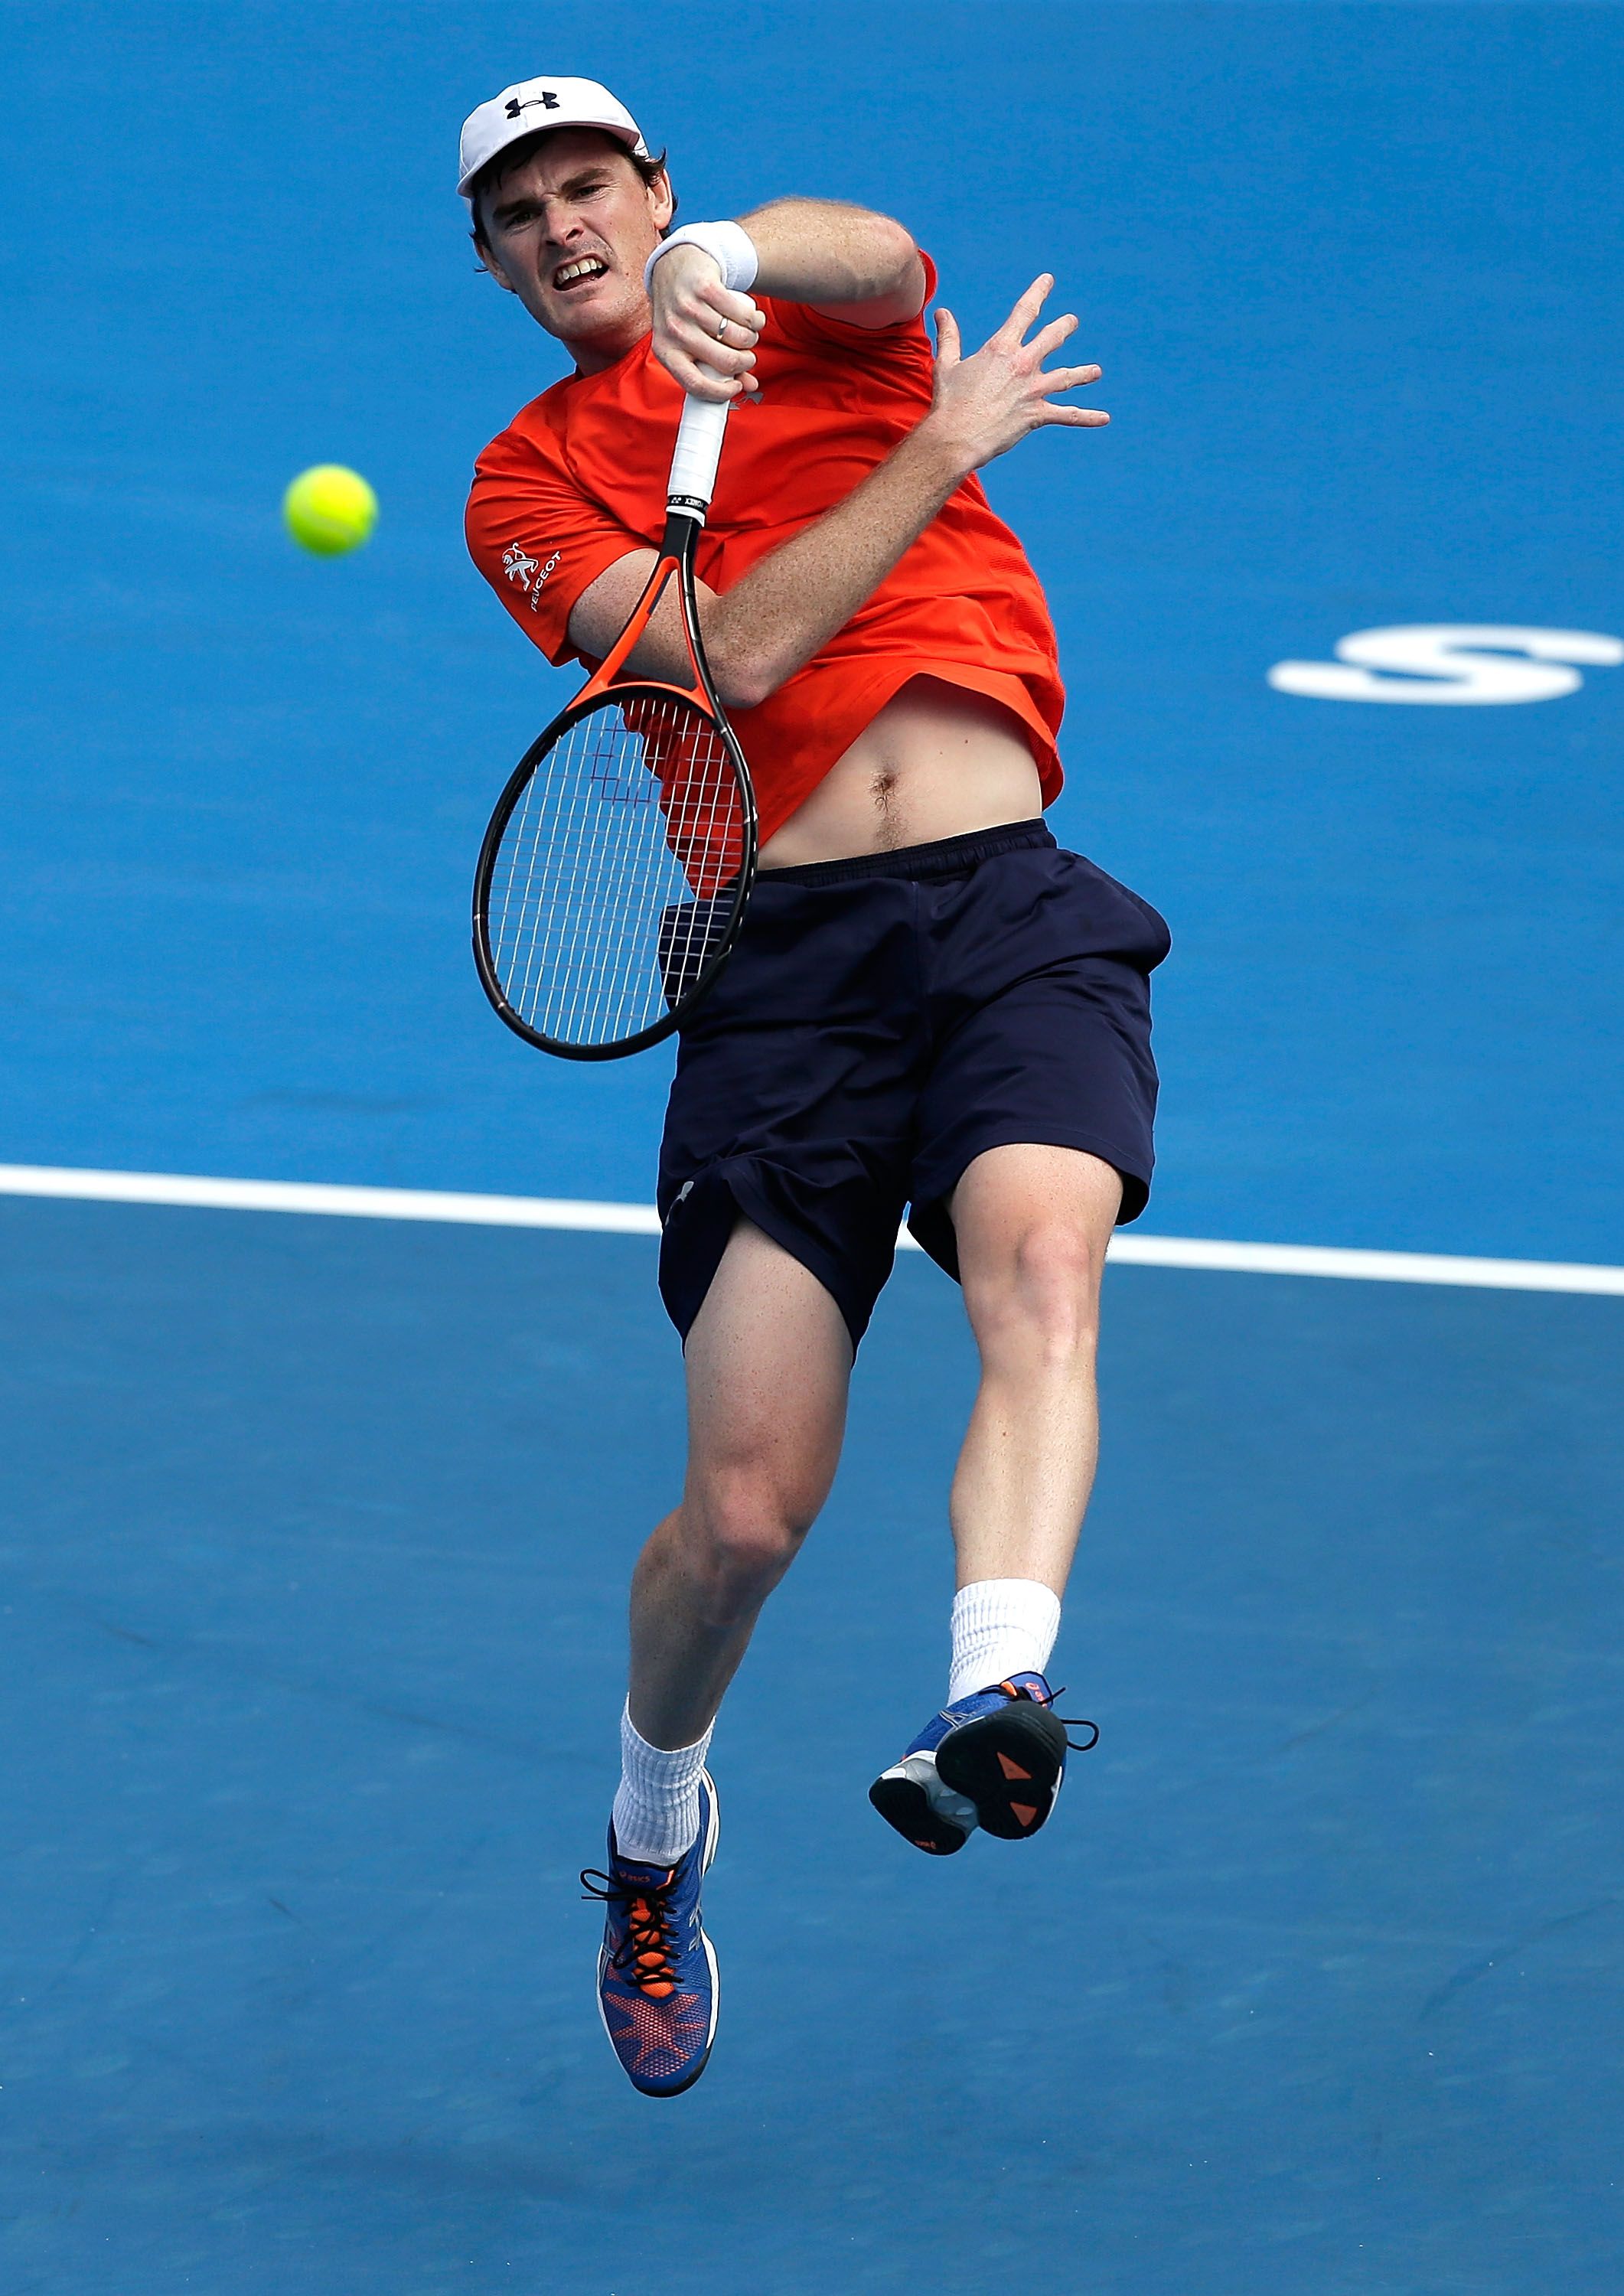 SYDNEY, AUSTRALIA - JANUARY 16: Jamie Murray of Great Britain plays a smash in the men's doubles final match with partner Bruno Soares of Brazil against against Rohan Bopanna of India and Florin Mergea of Romania during day seven of the 2016 Sydney International at Sydney Olympic Park Tennis Centre on January 16, 2016 in Sydney, Australia. (Photo by Mark Metcalfe/Getty Images)